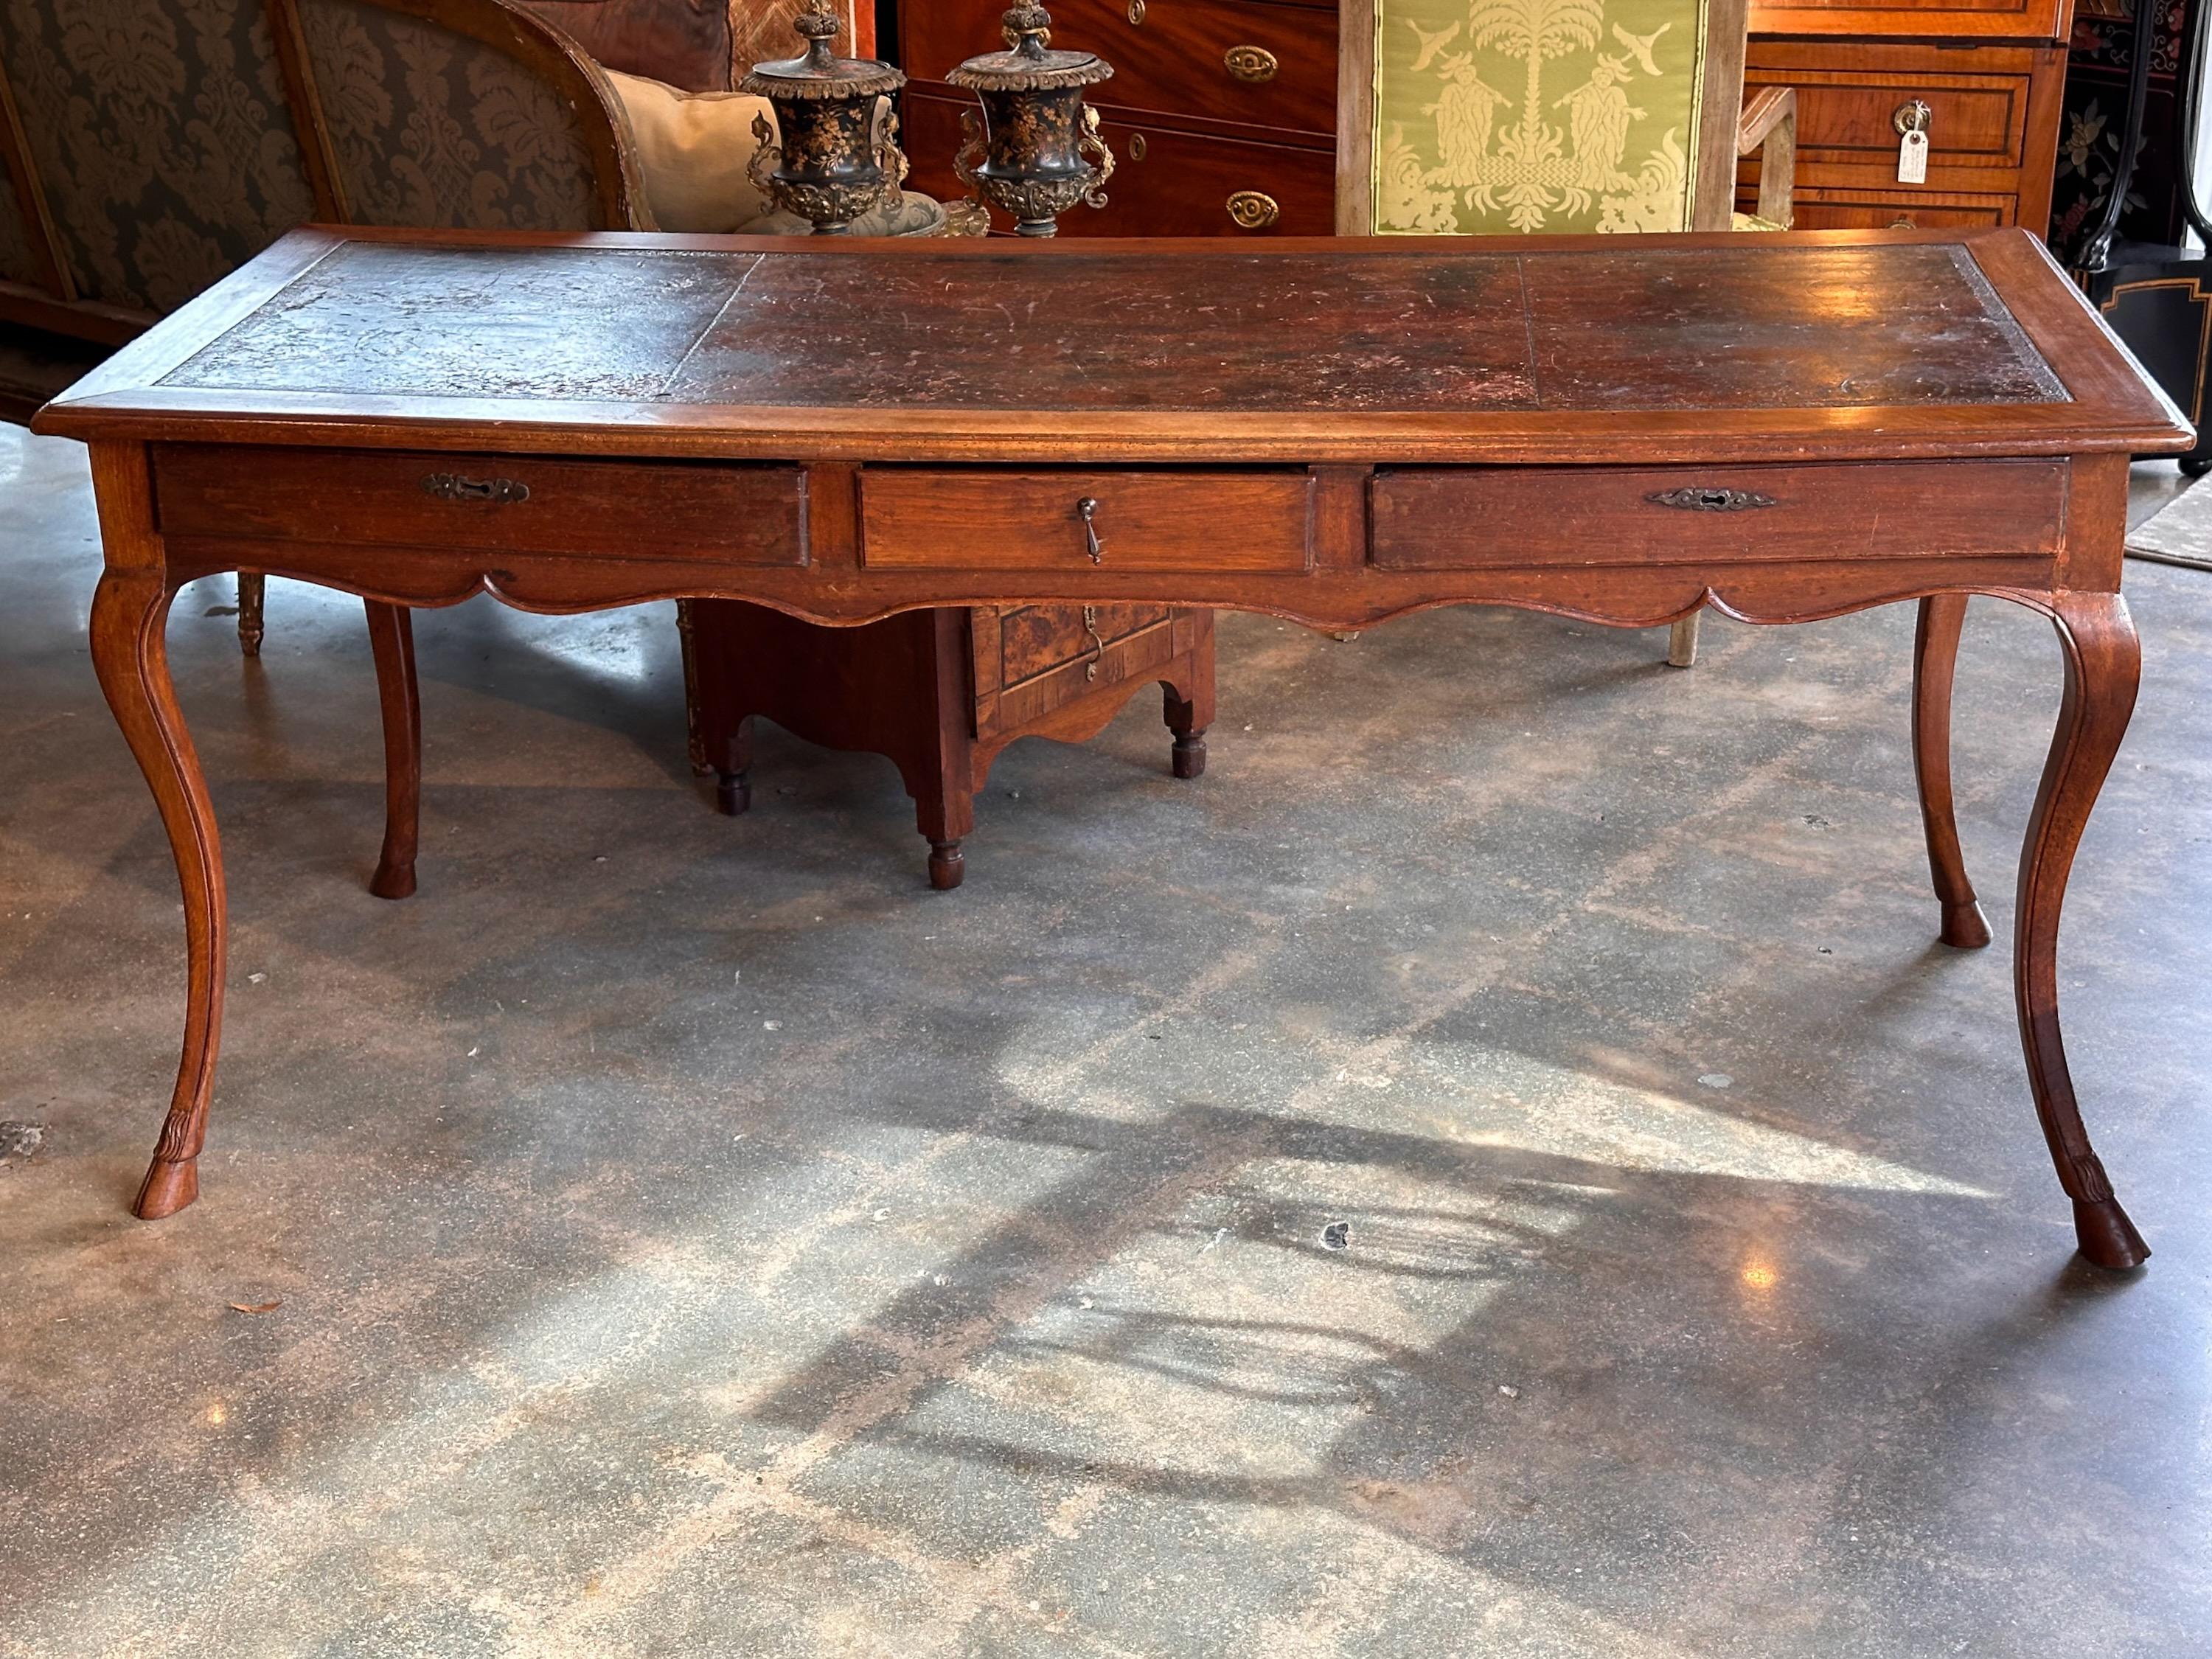 This table has all the style. Perfect for a desk or hall table.